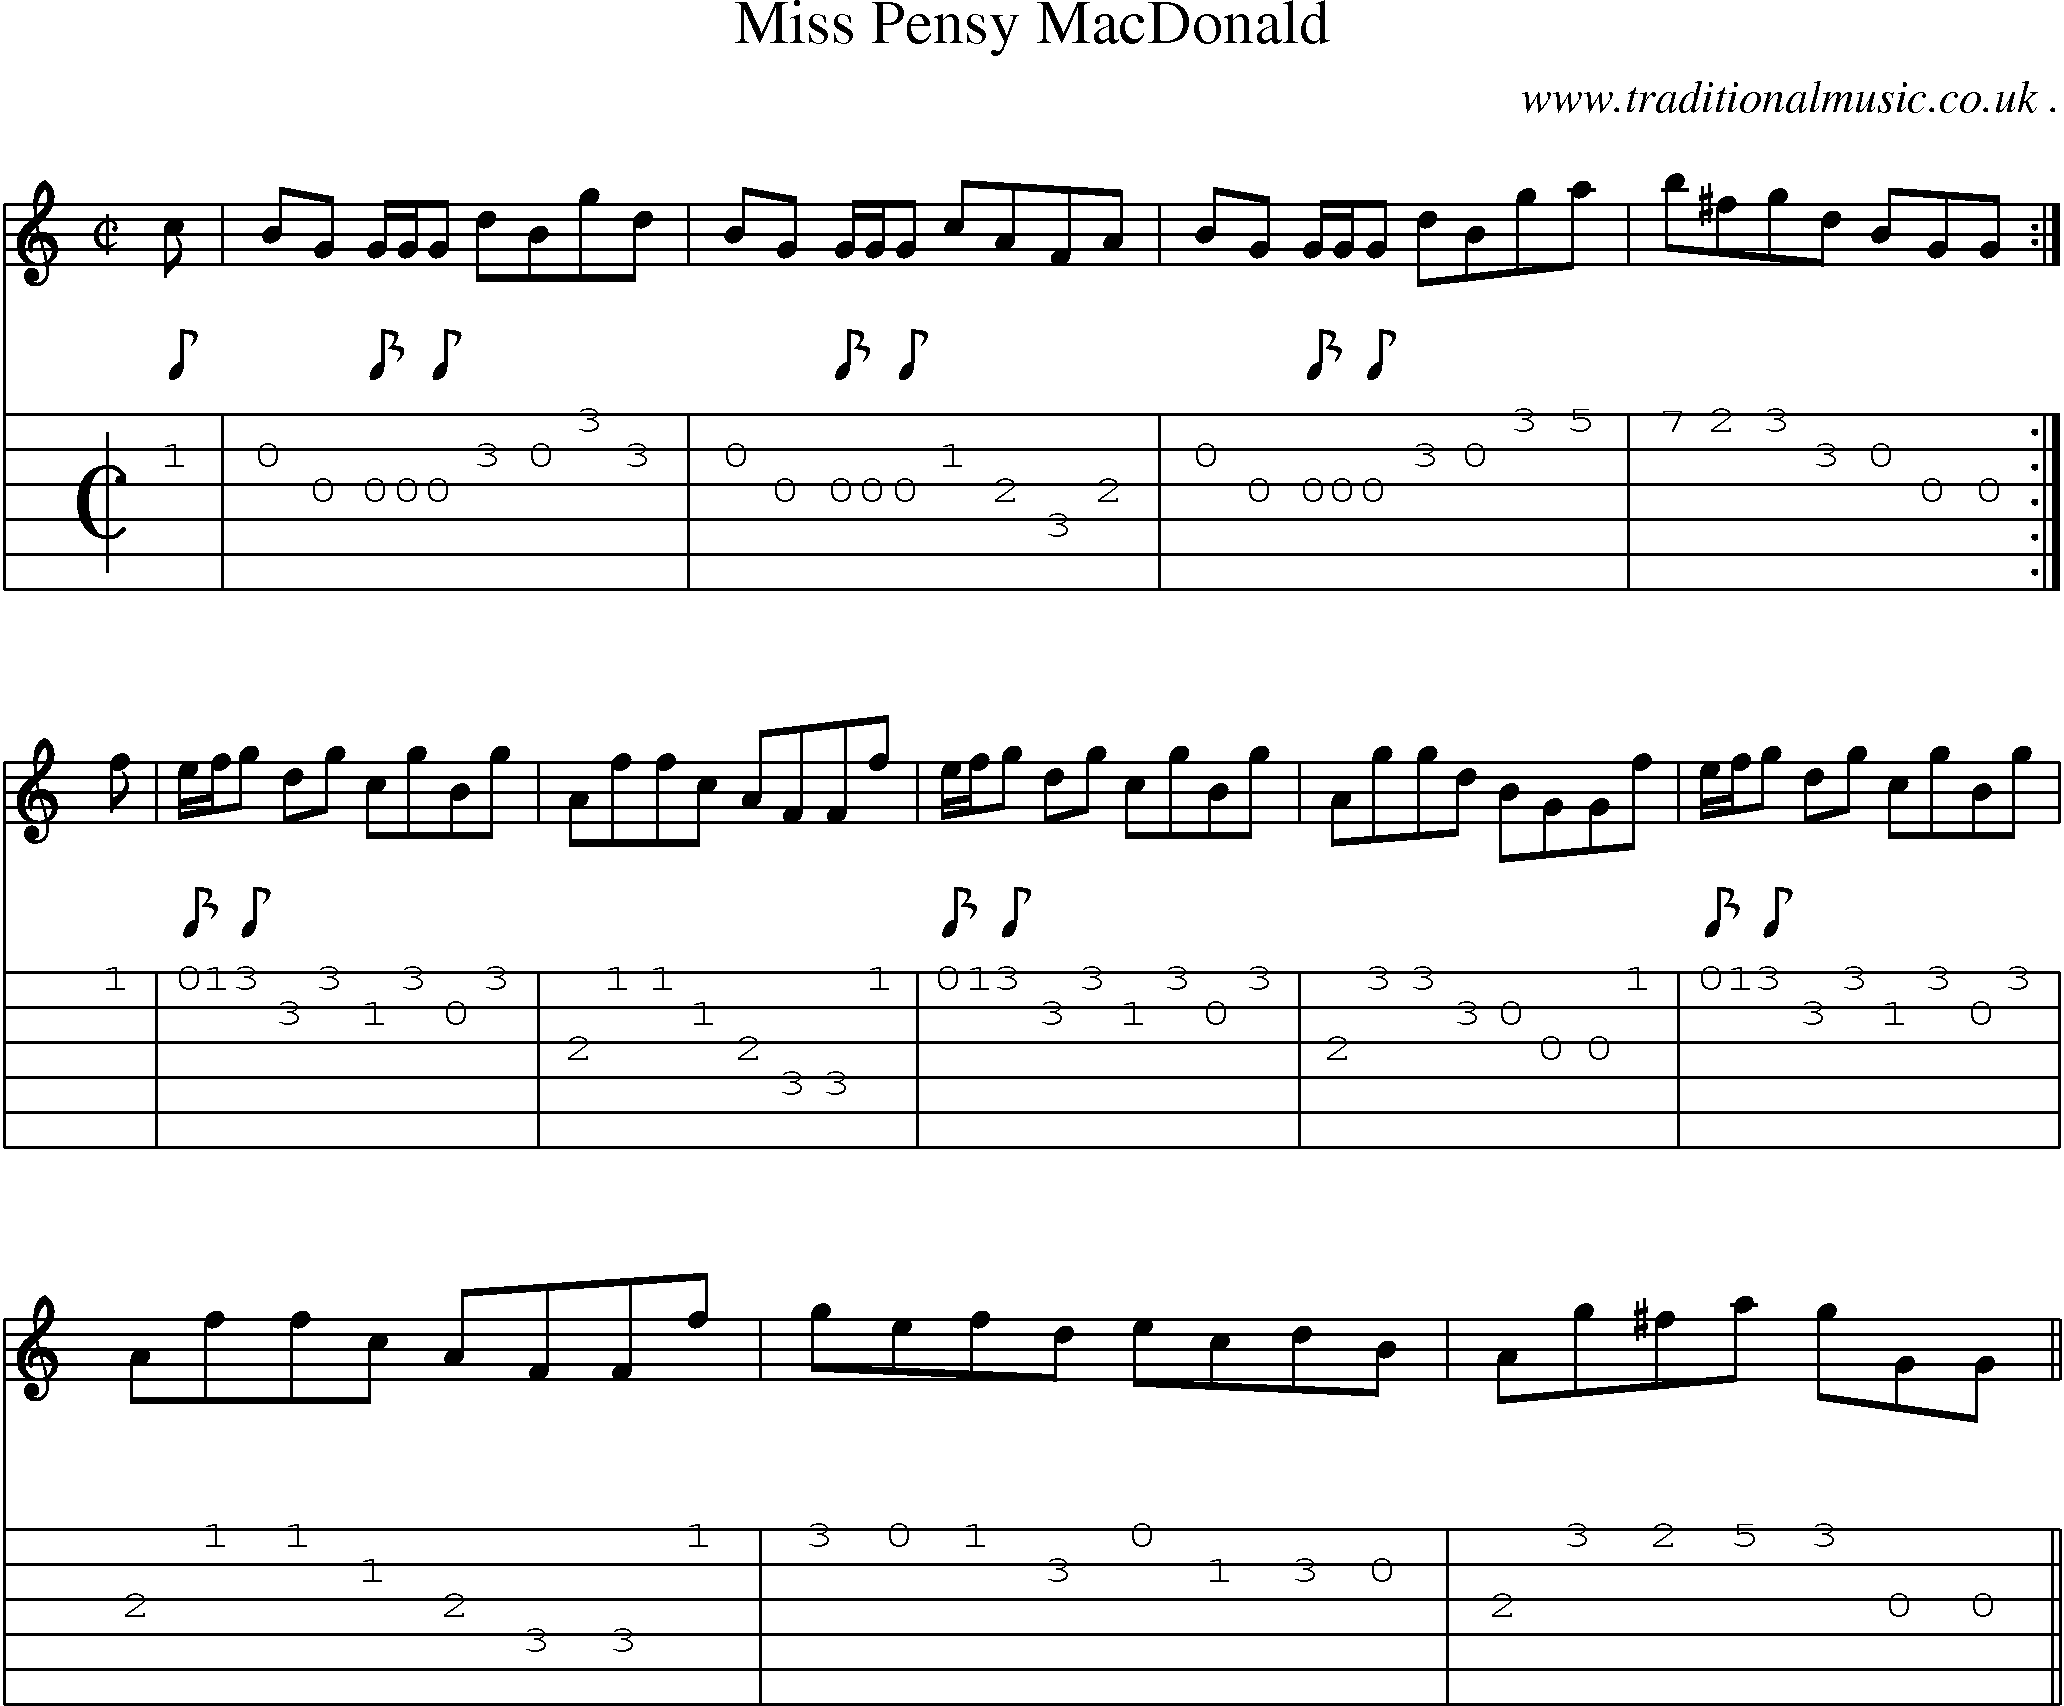 Sheet-music  score, Chords and Guitar Tabs for Miss Pensy Macdonald